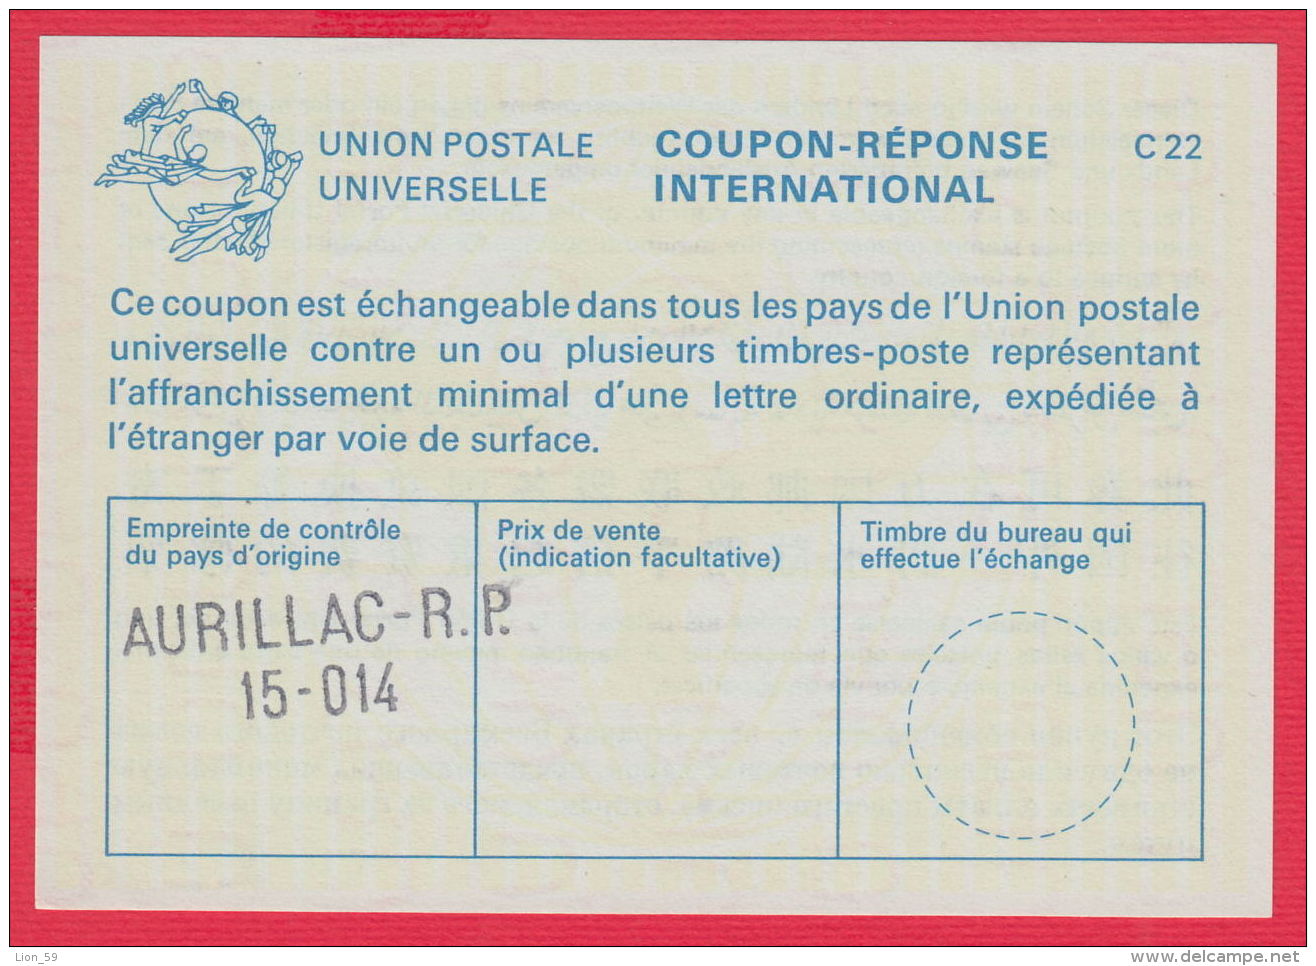 219352 /  International Reply Coupon Reponse C 22 - Aurillac - R.P. 15-014 ,   France Frankreich Francia - Antwoordbons